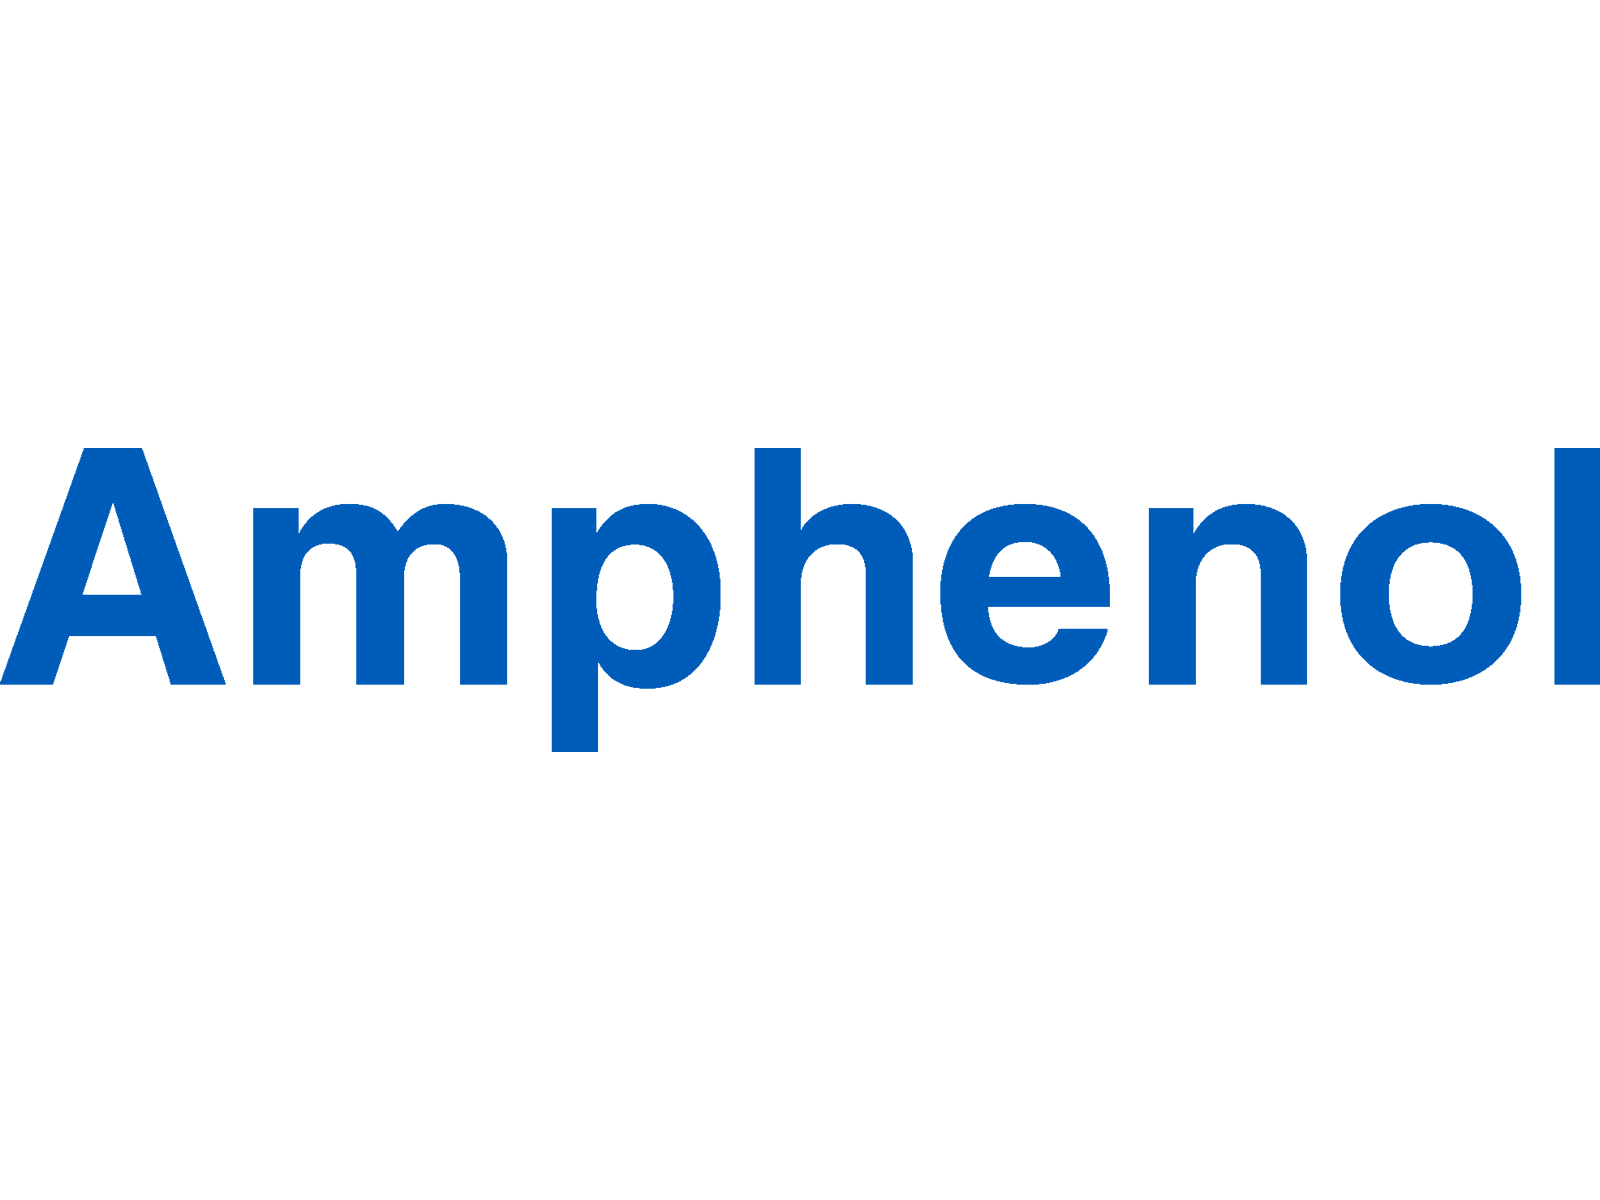 Amphenol Corporation is a major producer of electronic and fiber optic connectors, cable and interconnect systems such as coaxial cables. Amphenol is a portmanteau from the corporation's original name, American Phenolic Corp.